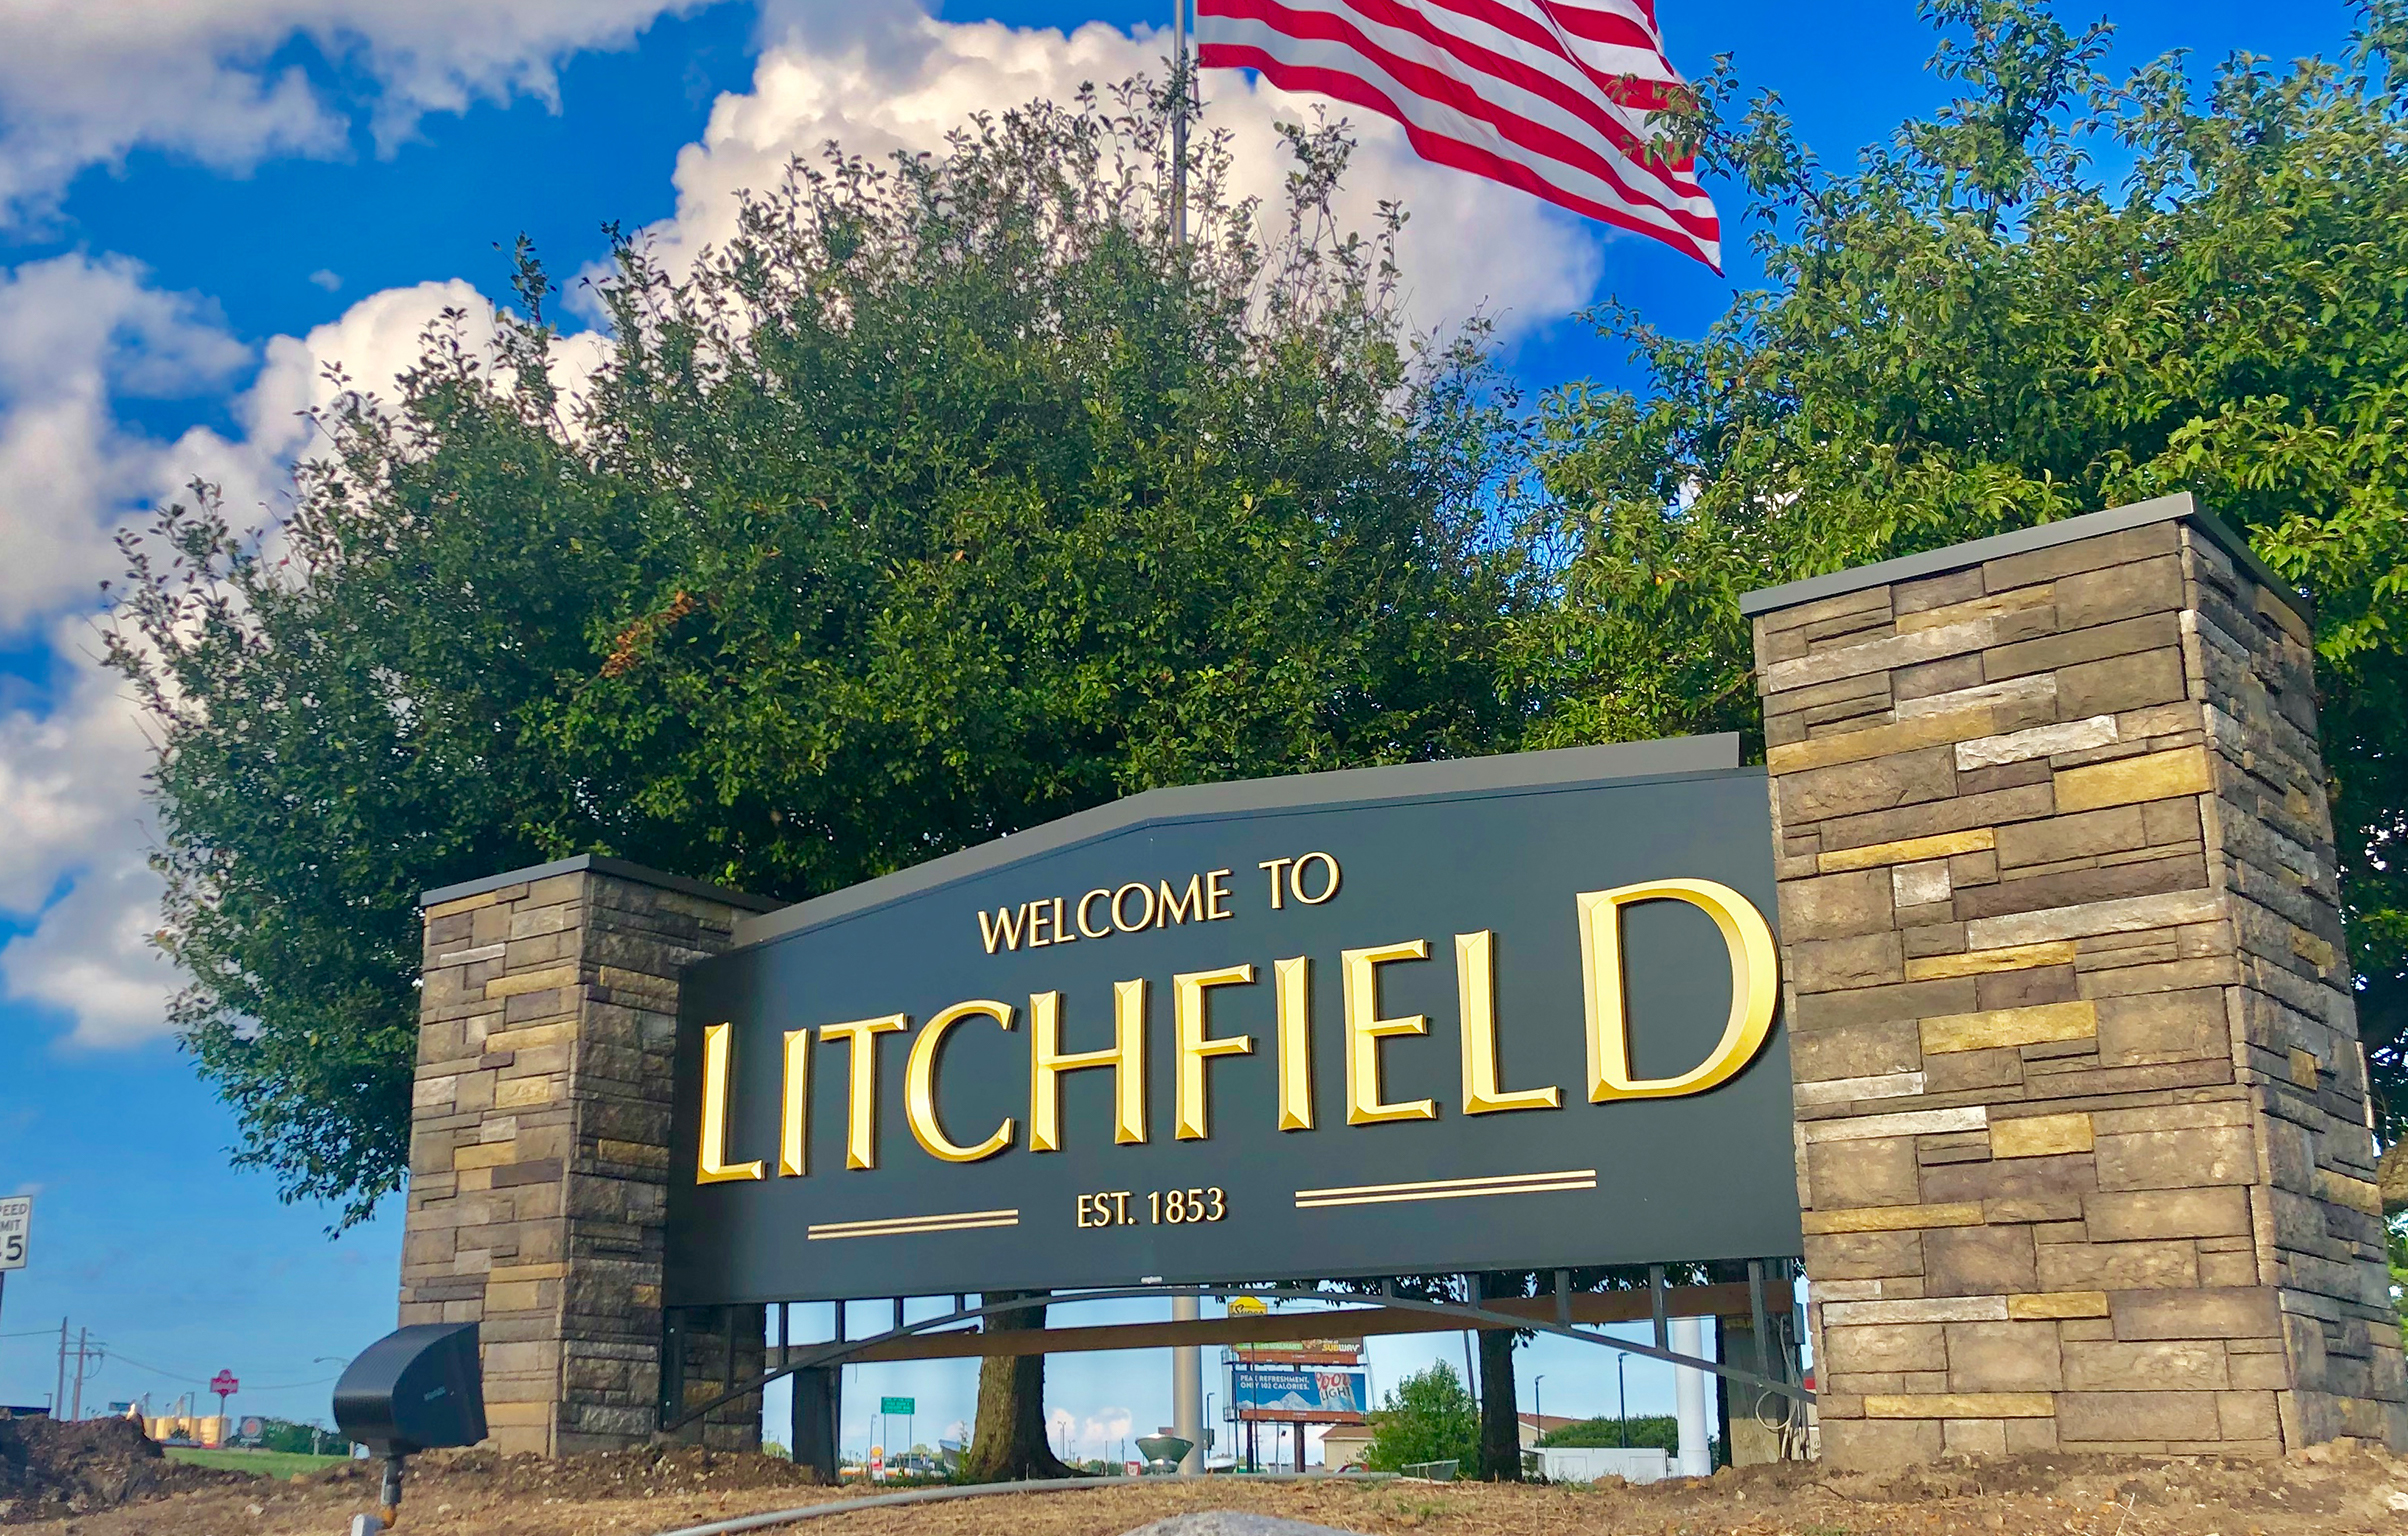 The City of Litchfield